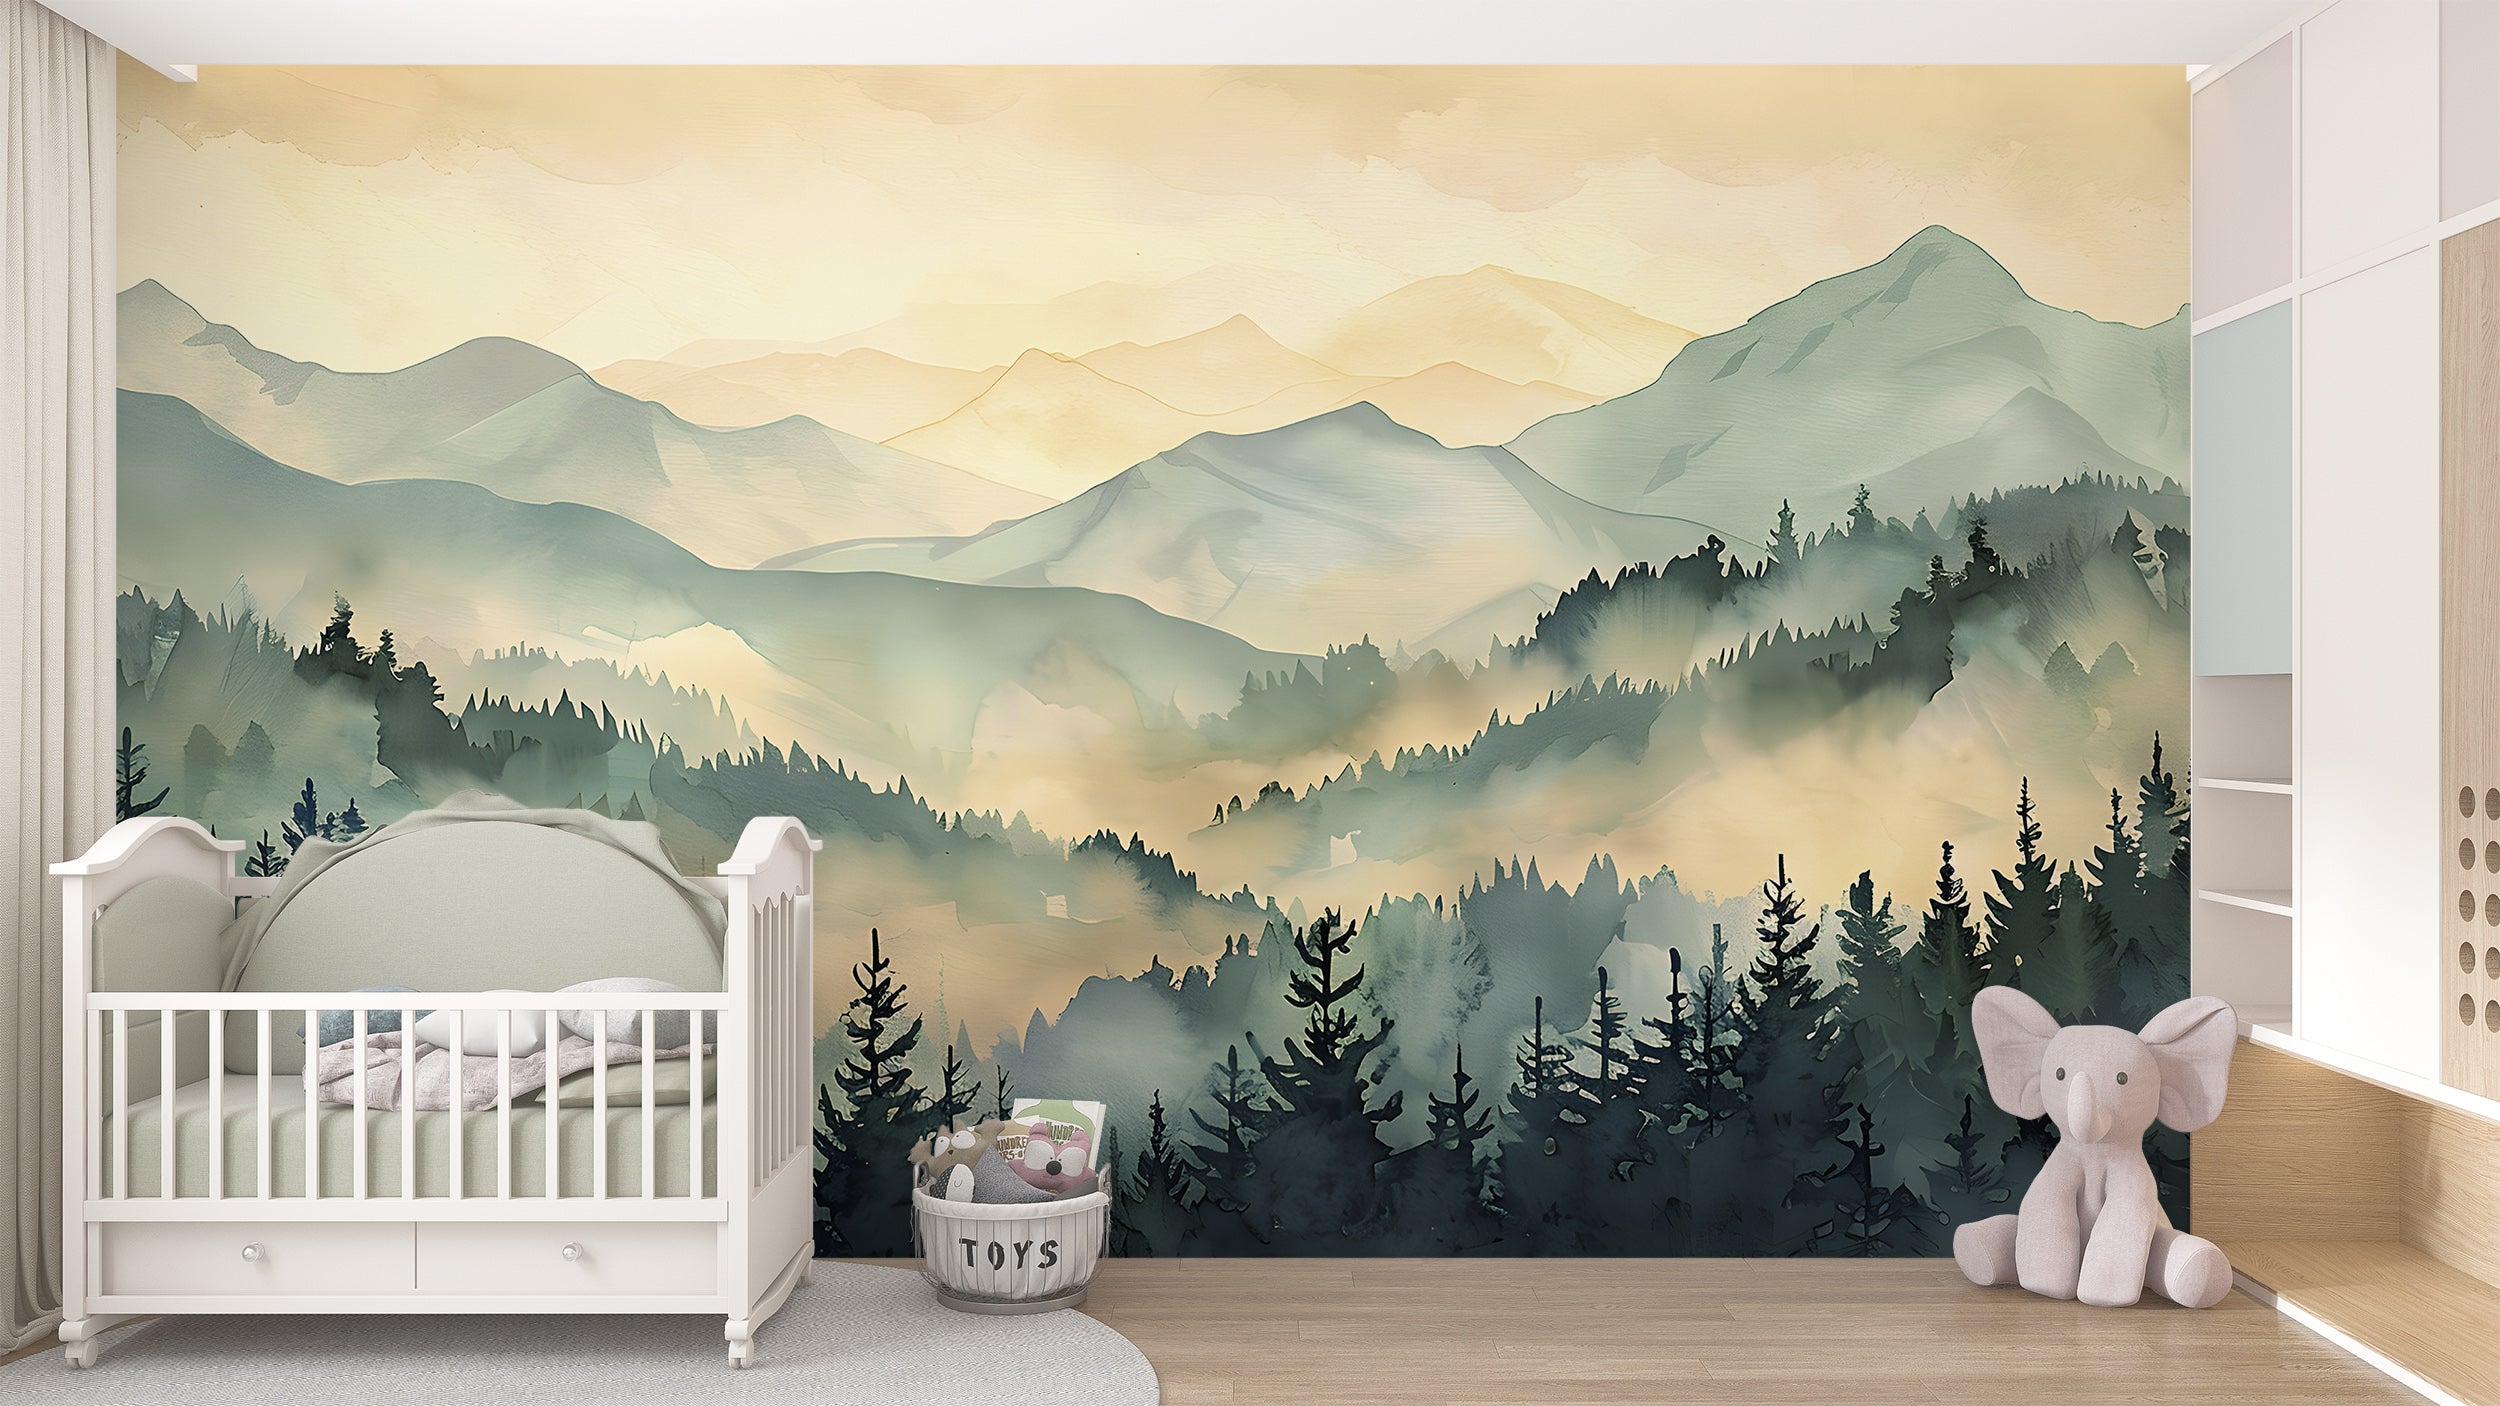 Green and Beige Mountains Landscape Mural, Watercolor Pine Forest and Mountain Wallpaper, Self-adhesive Removable Foggy Nature Decor